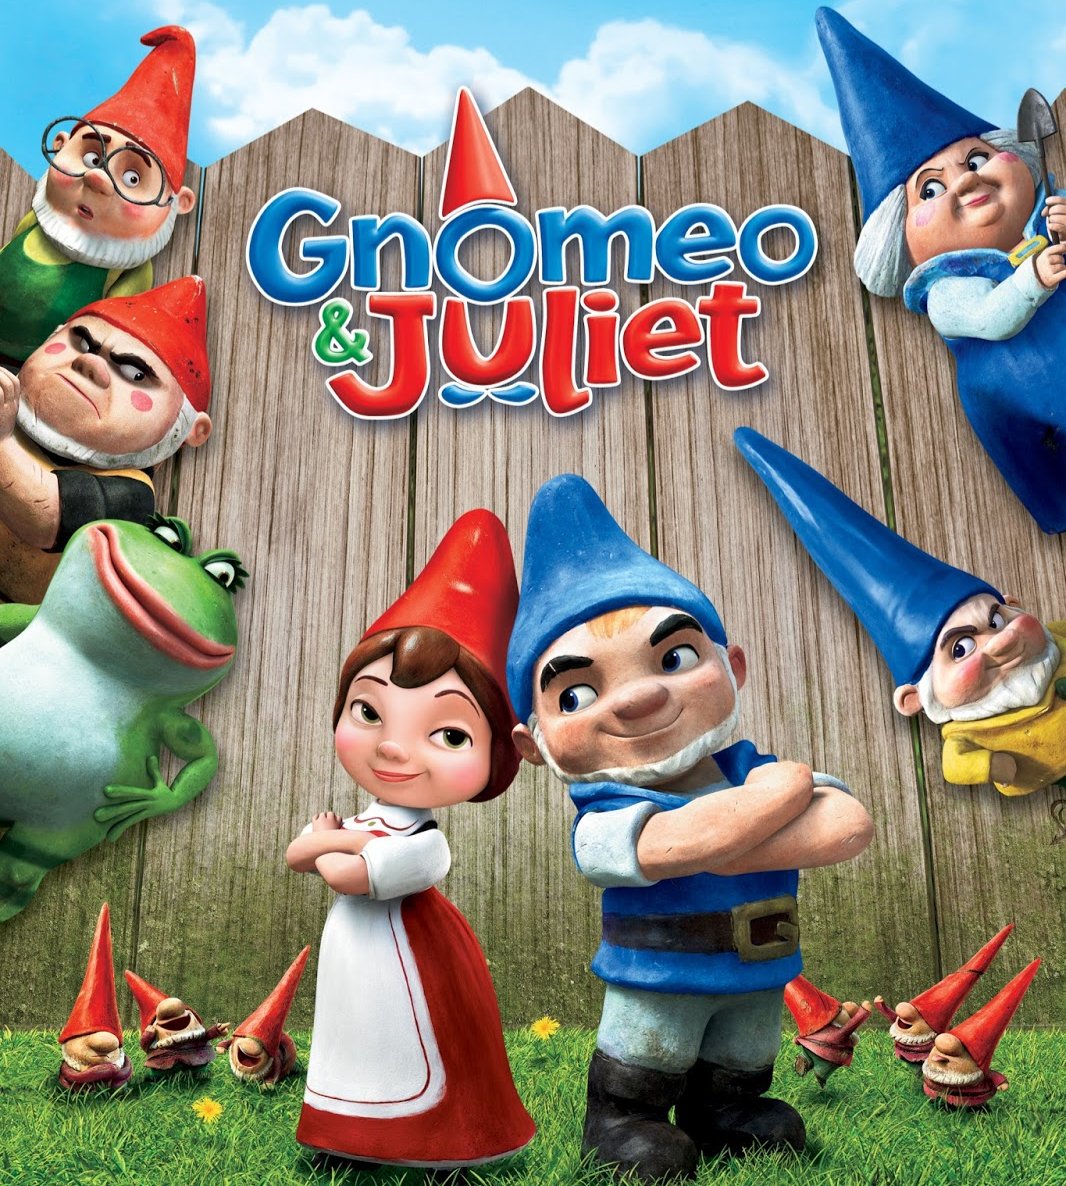 gnomeo and juliet party